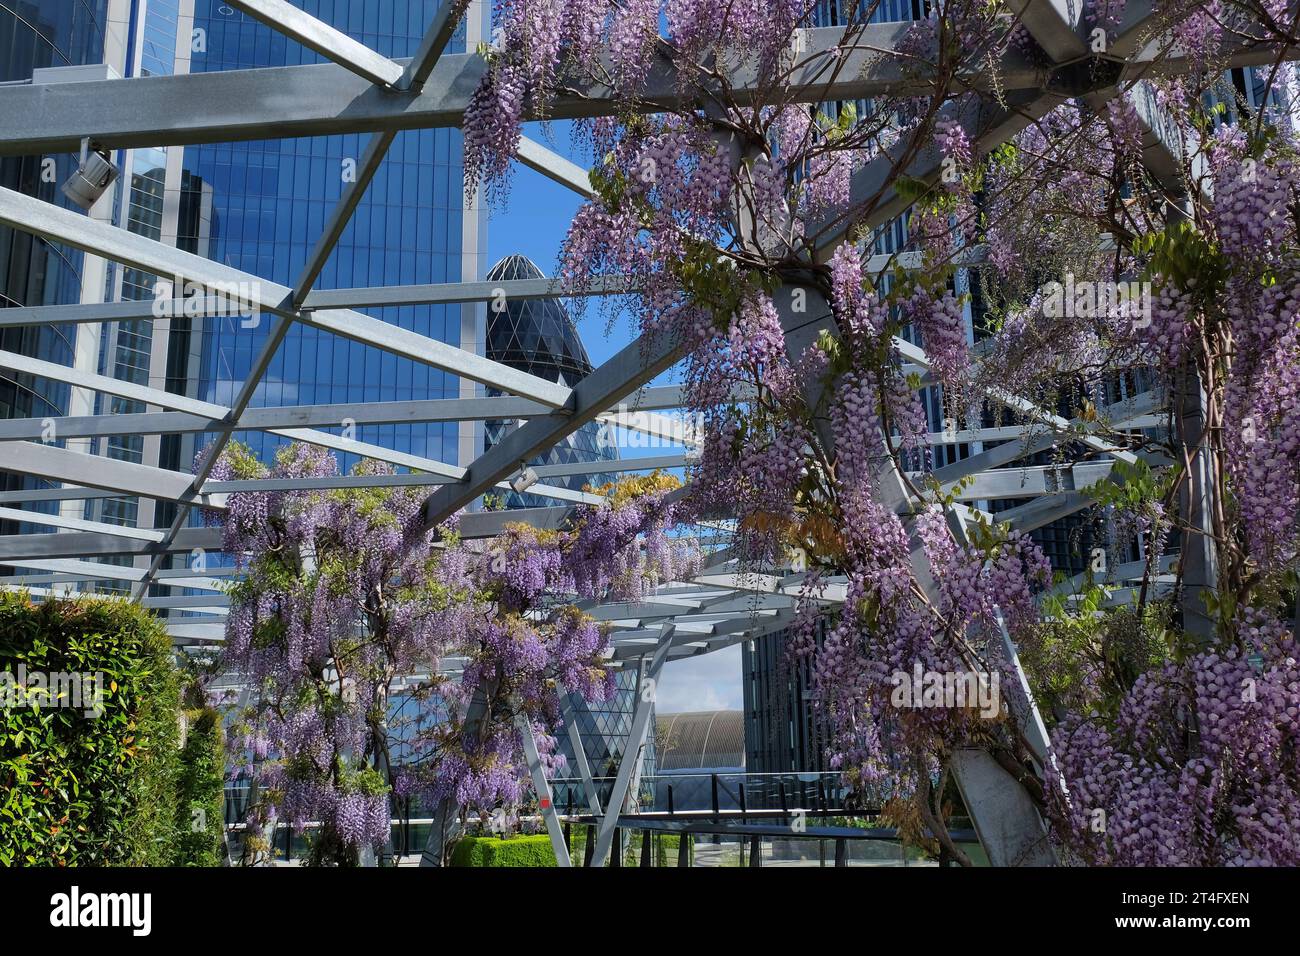 London: Wisteria in bloom on Roof Garden at 120 Fenchurch Street with Gherkin building in City of London, England, UK Stock Photo